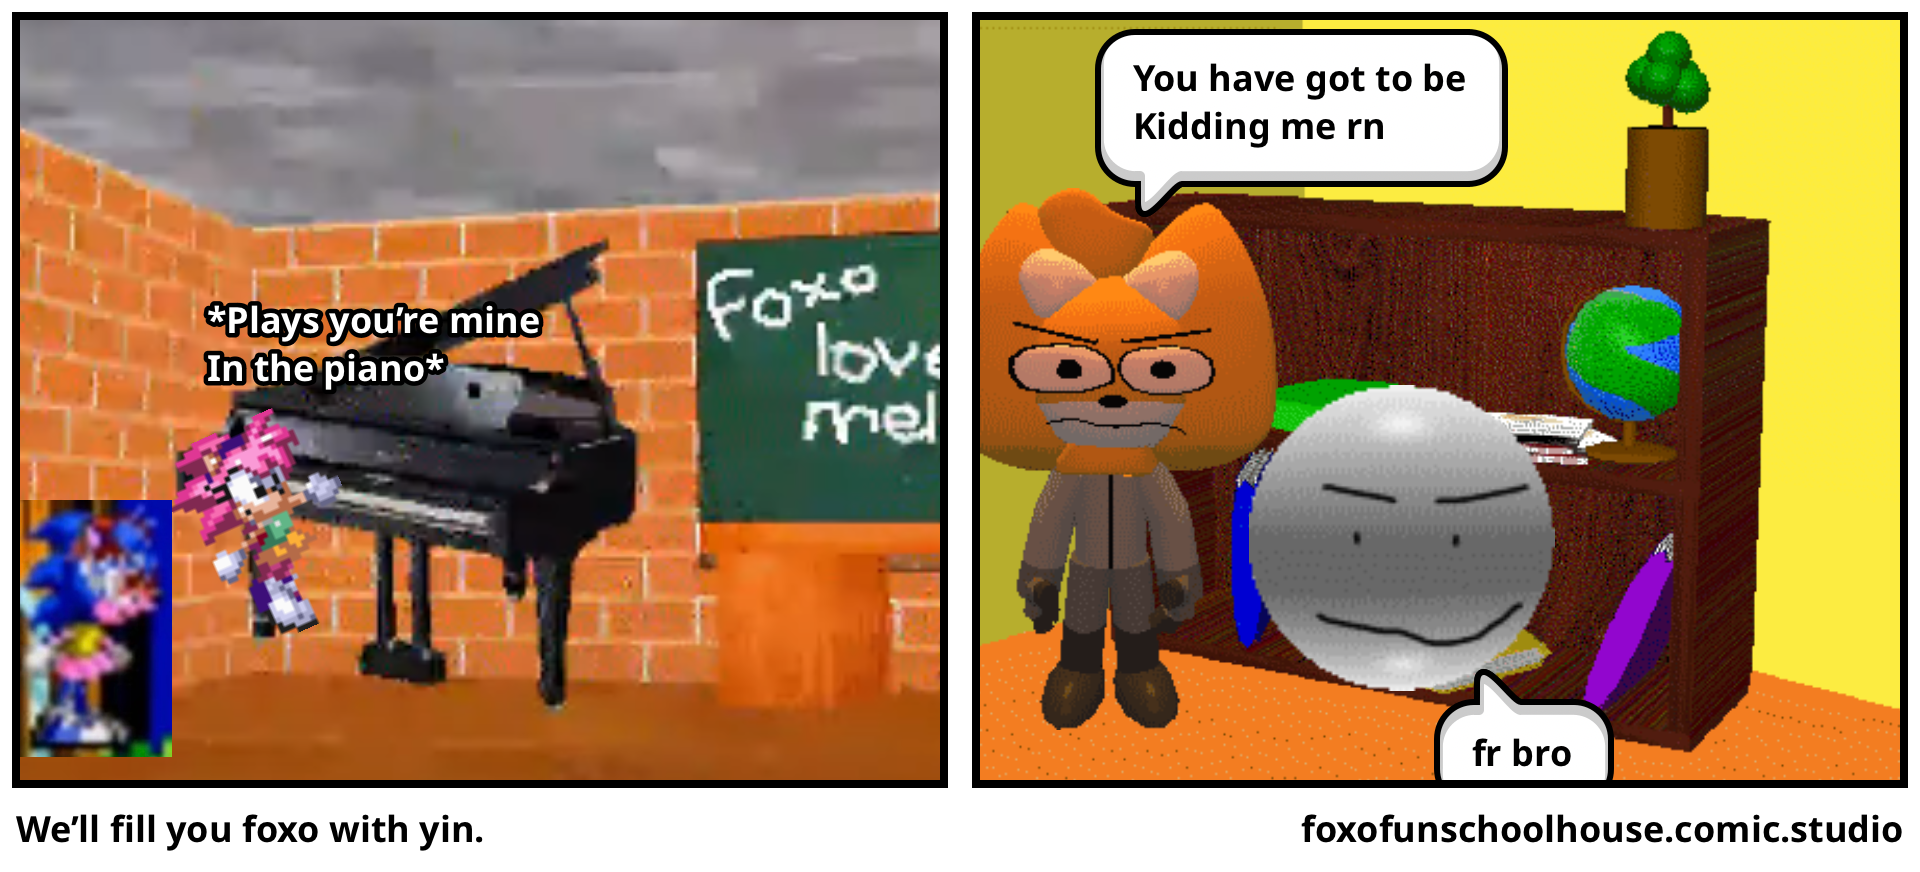 We’ll fill you foxo with yin.